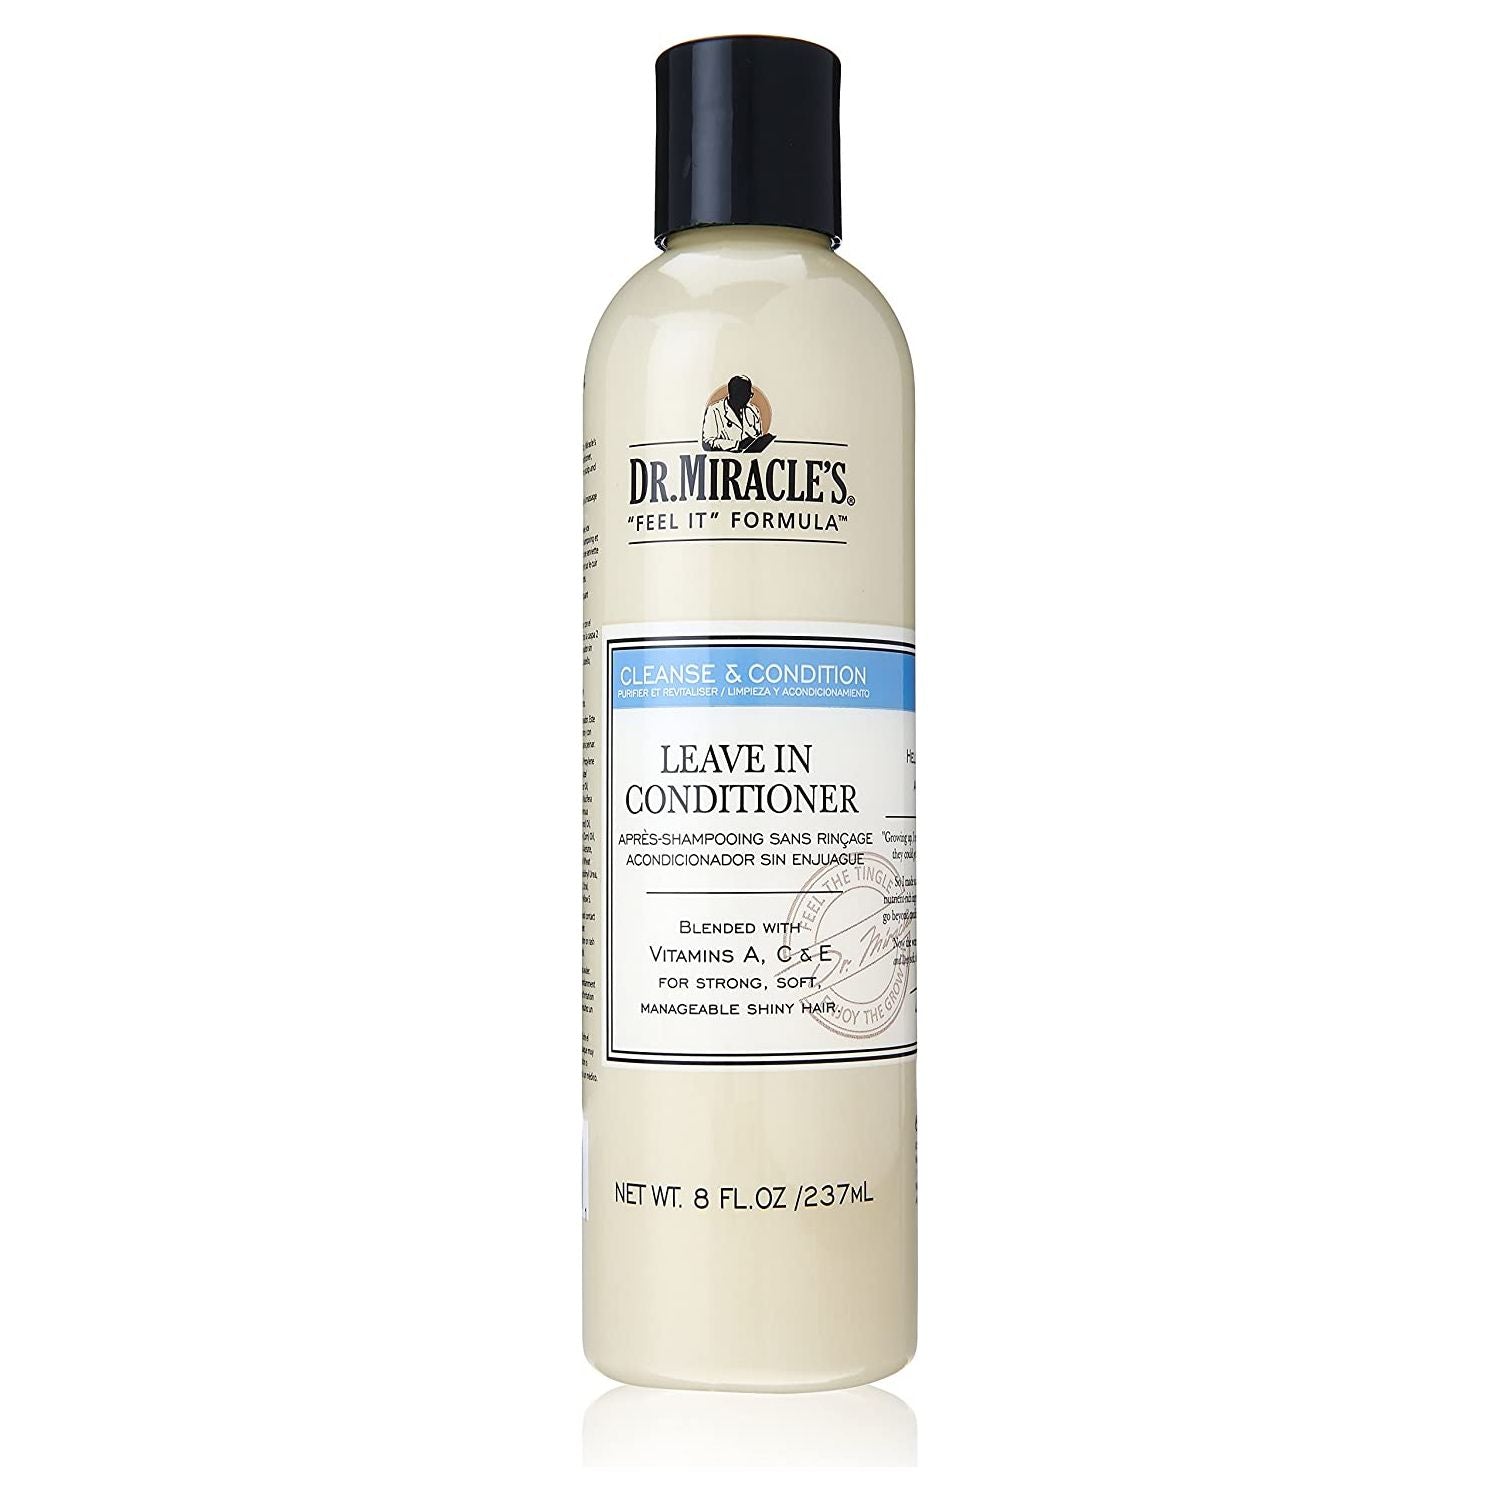 DR. MIRACLES LEAVE-IN COND 8oz